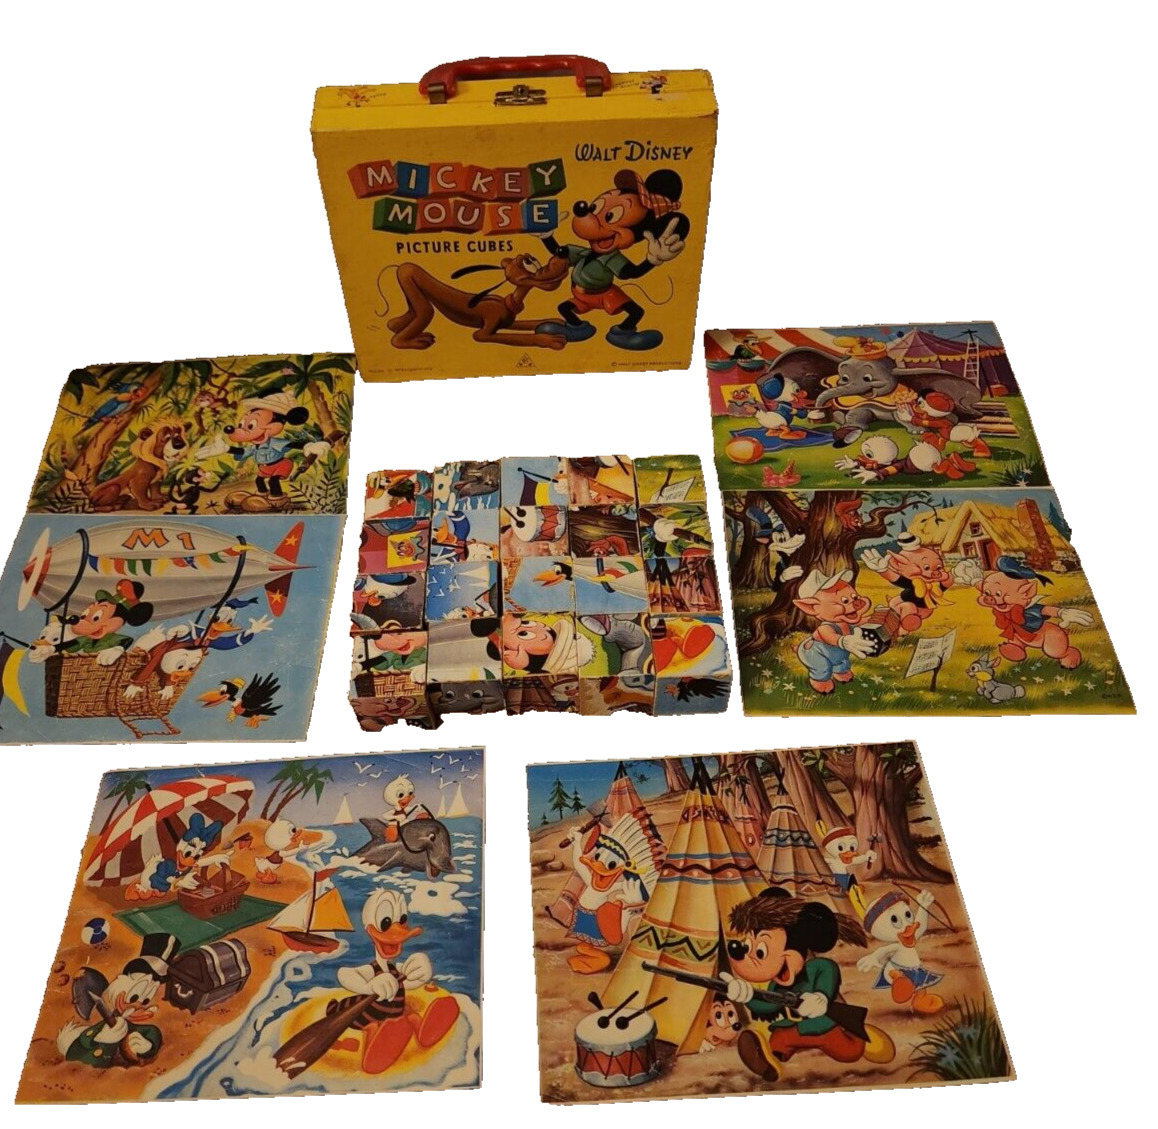 🔥 1950s Disney Mickey Mouse Picture Cubes West Germany MICKY MAUS RARE 20 CT